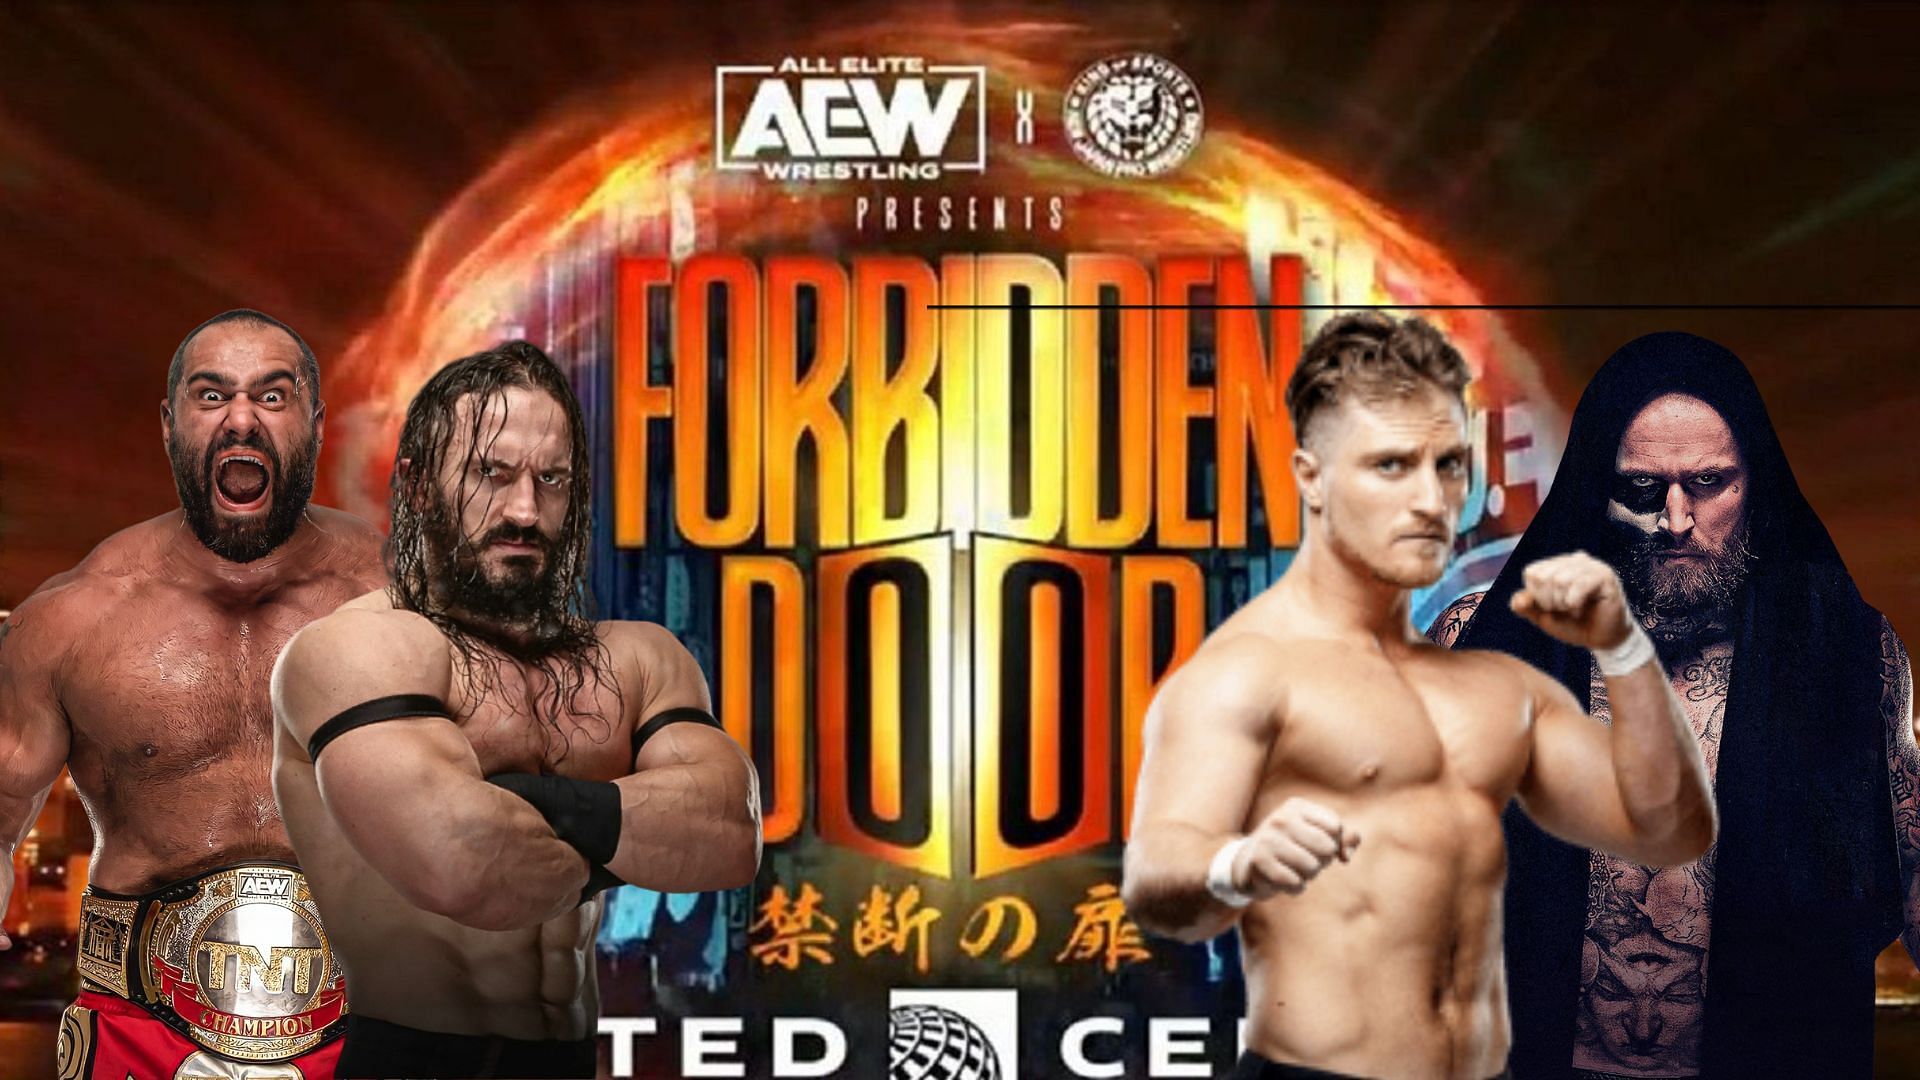 Forbidden Door has a stacked card of matches scheduled!